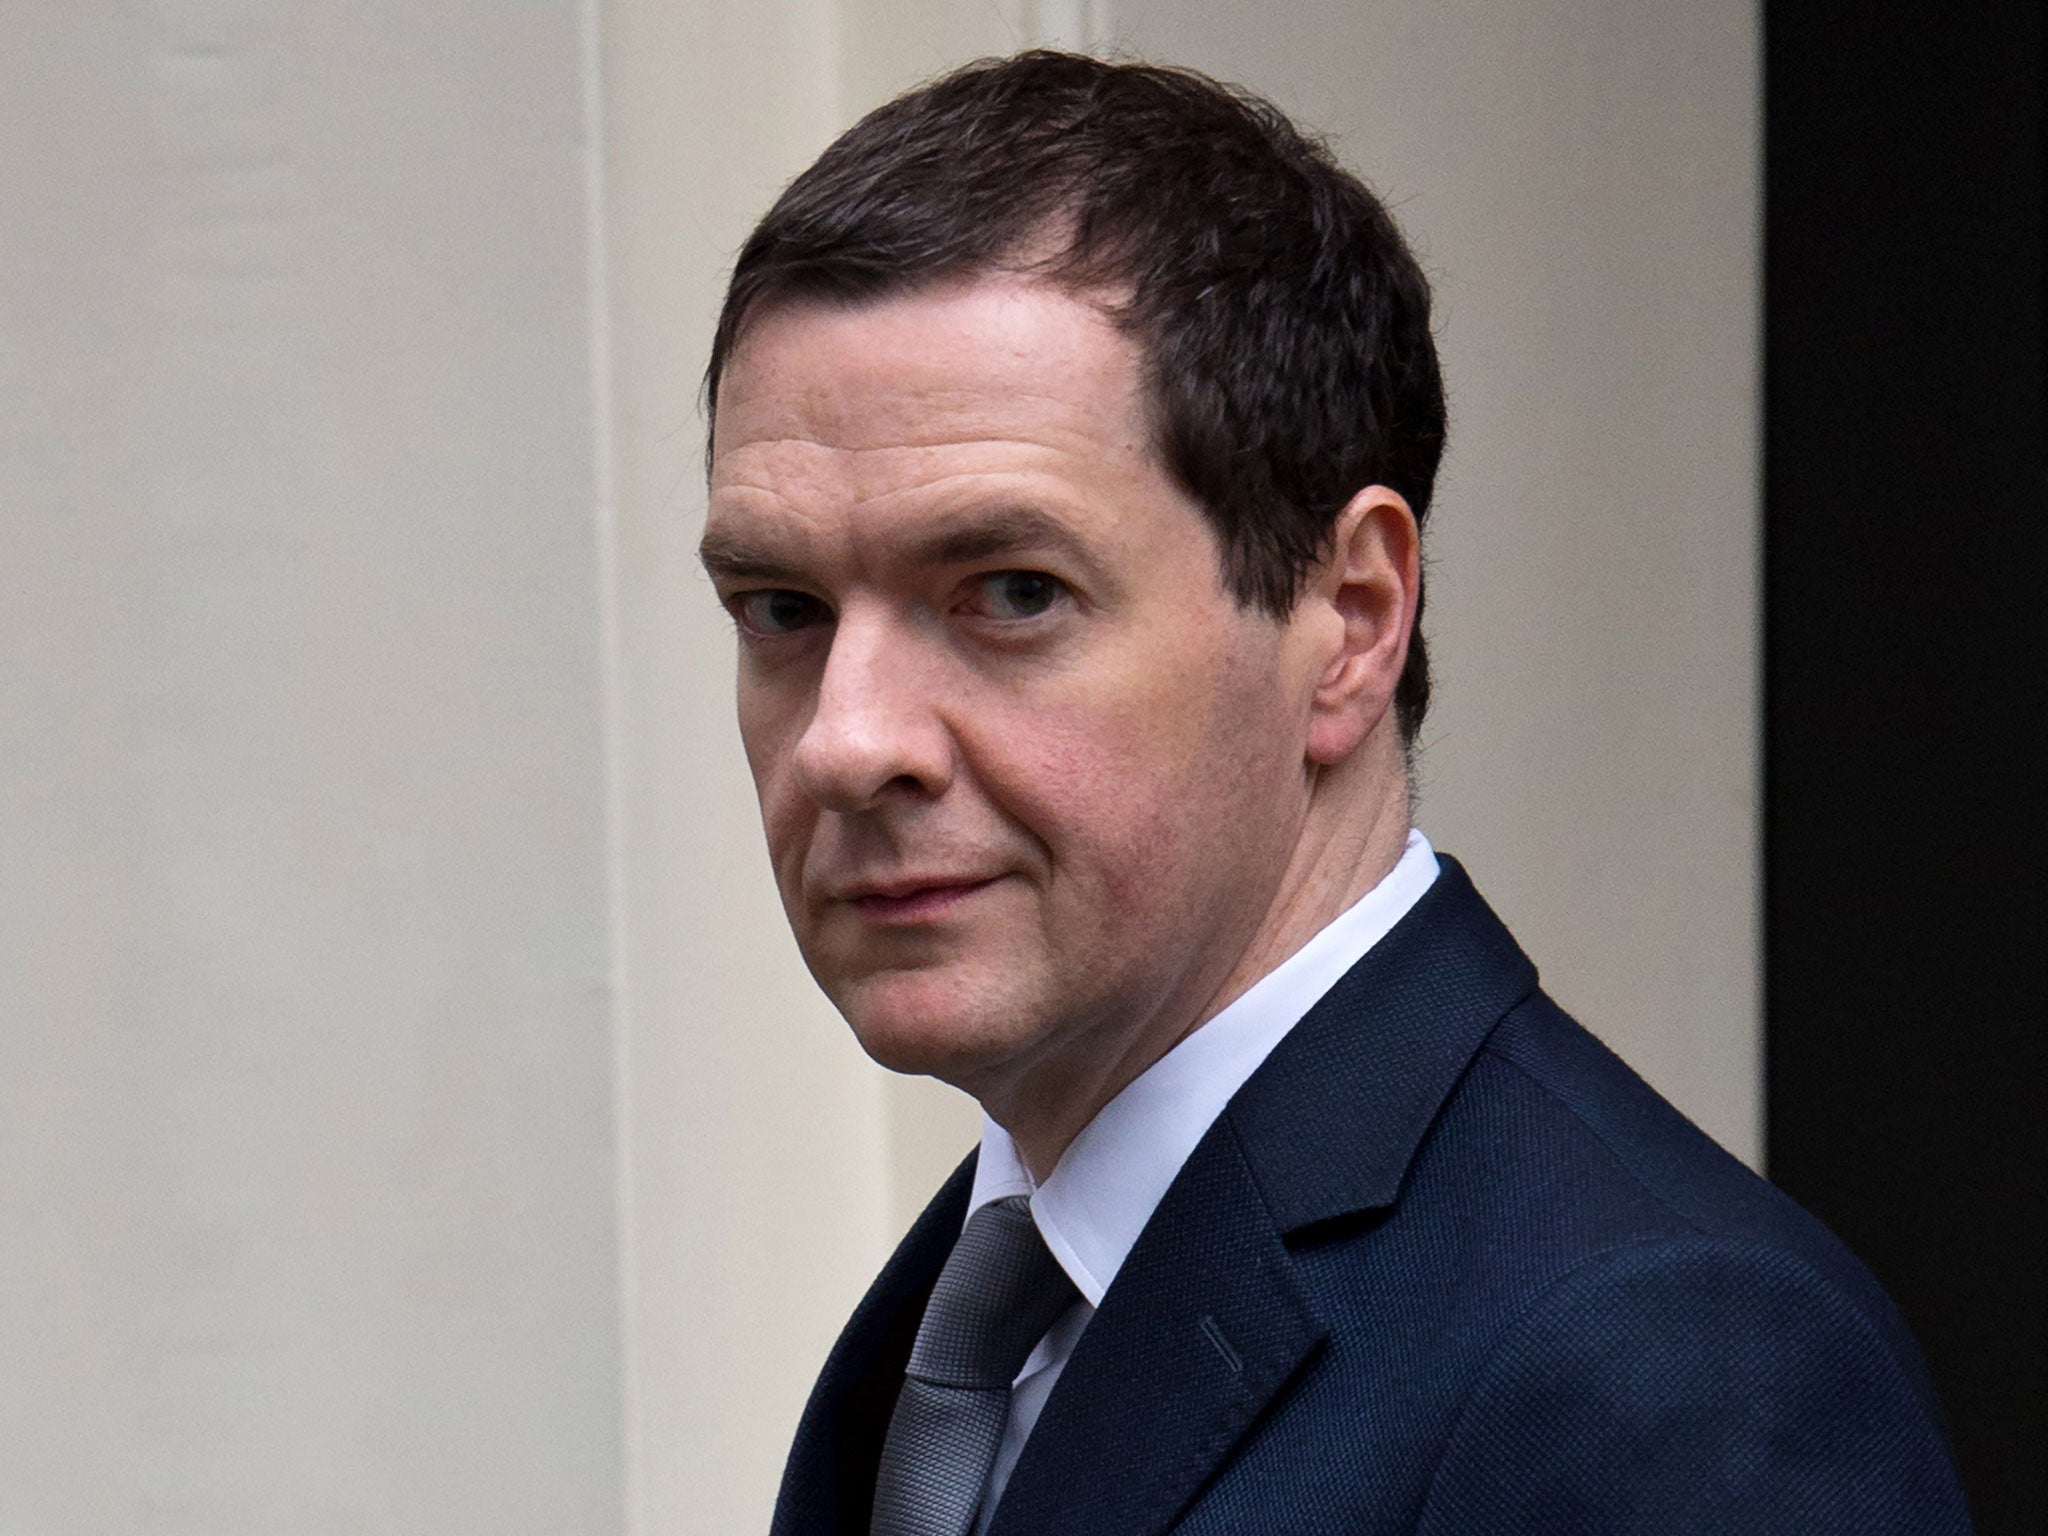 Osborne has met privately with bankers